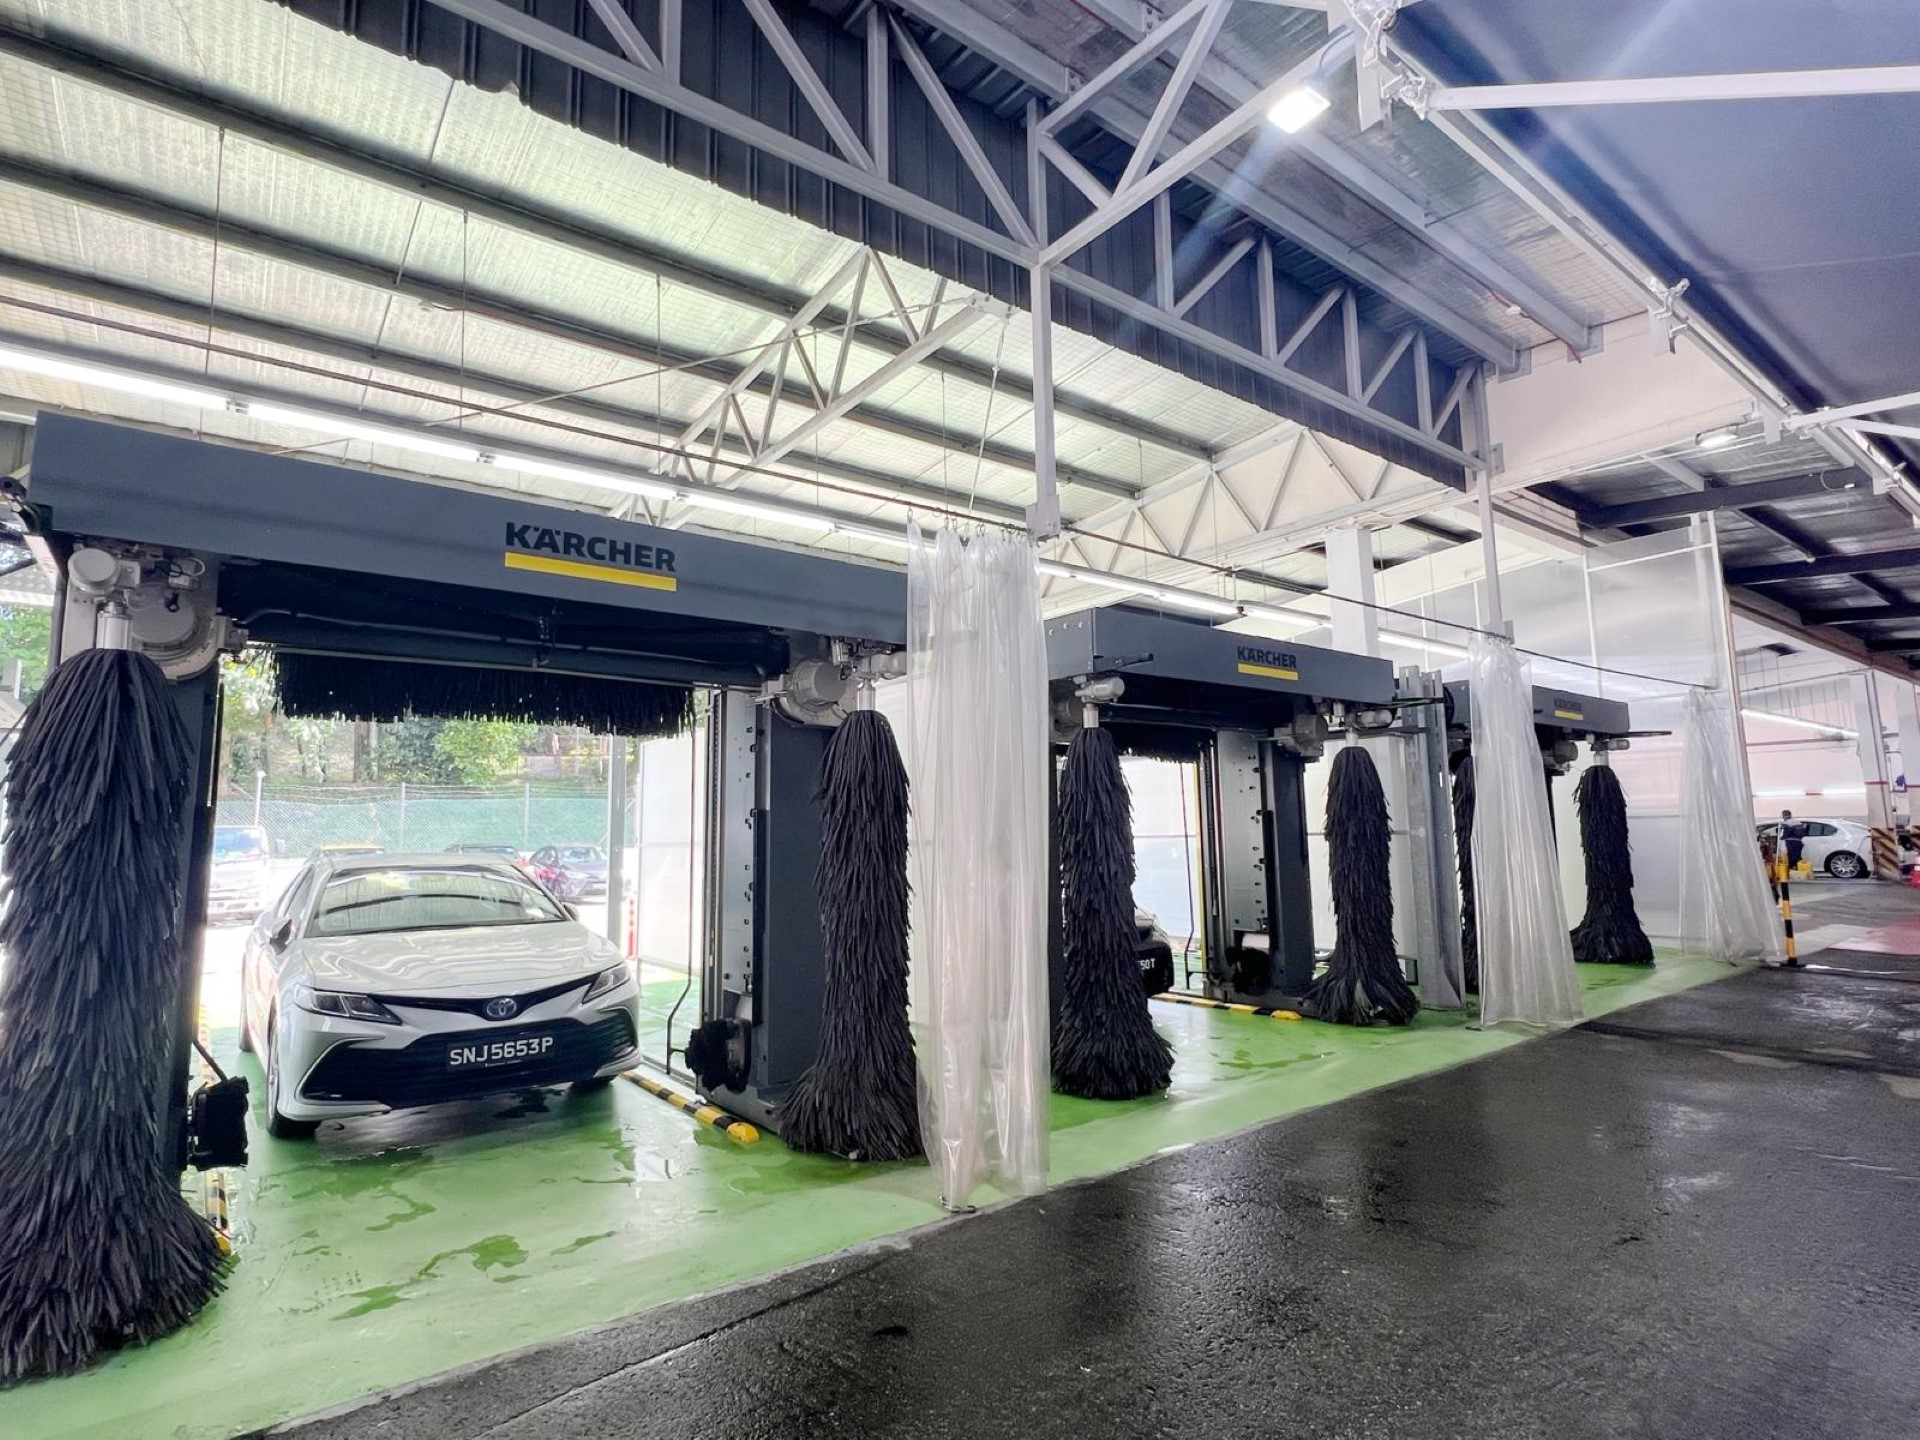  Inchcape and Karcher Launch New Water-Saving Car Wash